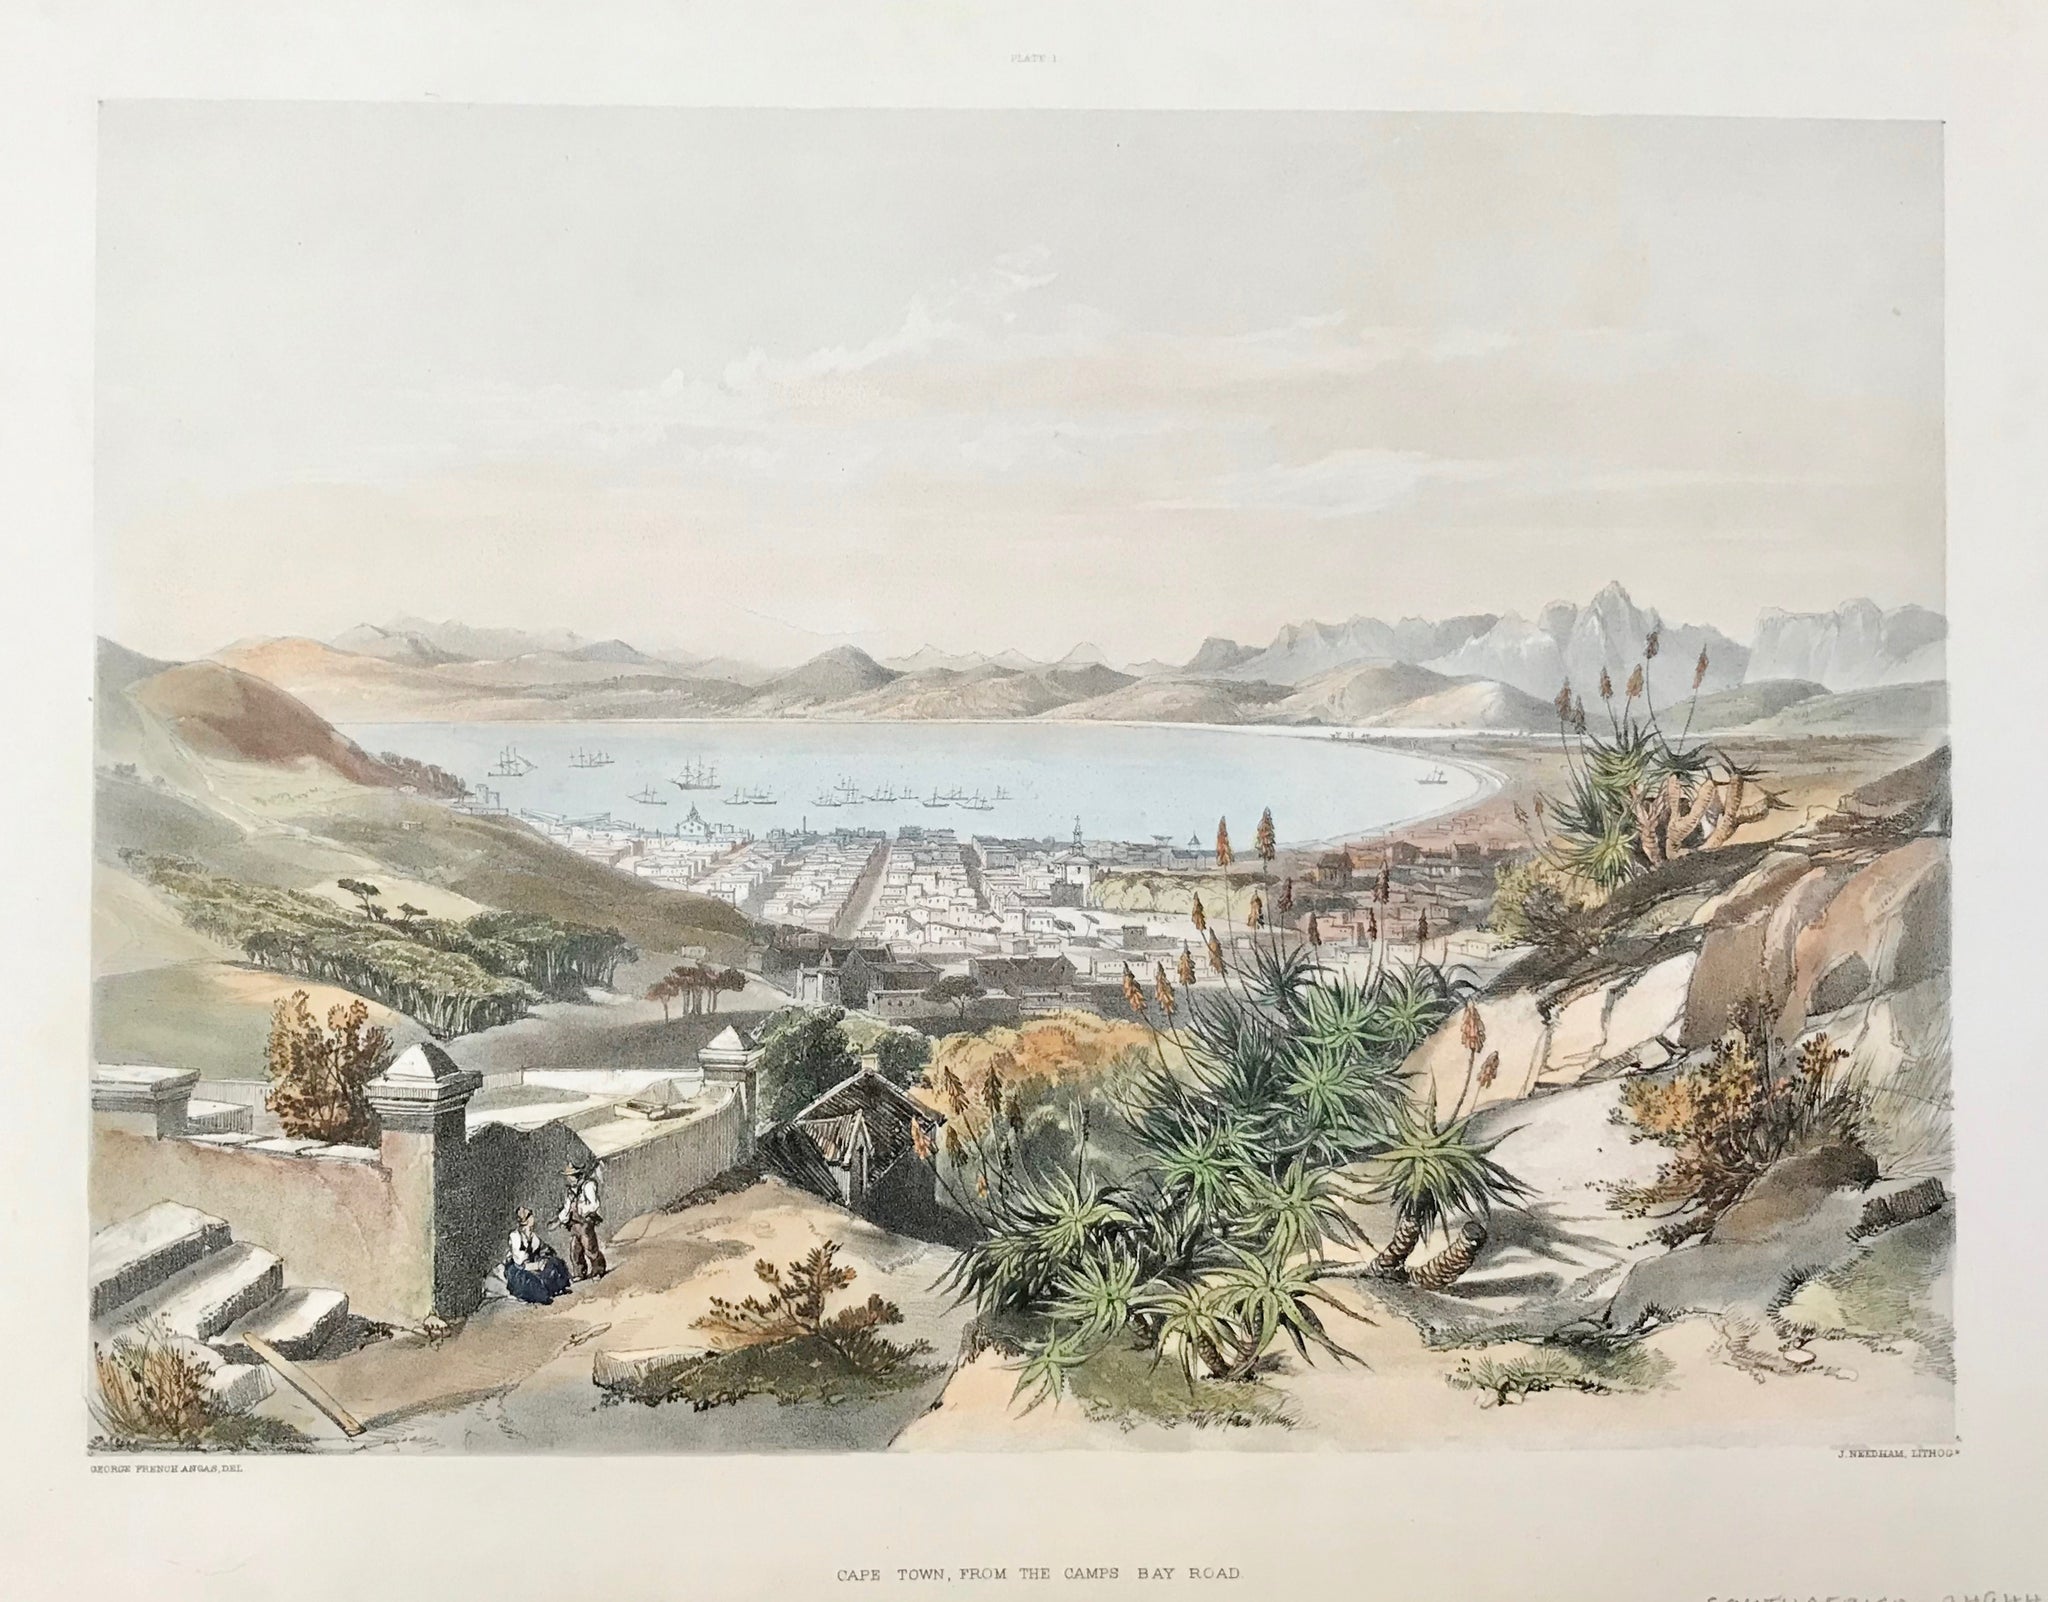 "Cape Town, from the Camps Bay Road"  Hand-colored lithograph by Jonathan Needham (active second half of 19th century).  After the drawing by George French Angas (1822-1886)  Published in:  "The Kafirs Illustrated in a Series of Drawings - The Amazulu, The Amaponda, ad Amakosa Trbes also Portraits of the Hottentot, Malay, Fingo, and other Races Inhabiting Southern Africa"  By George French Angas. London, 1849